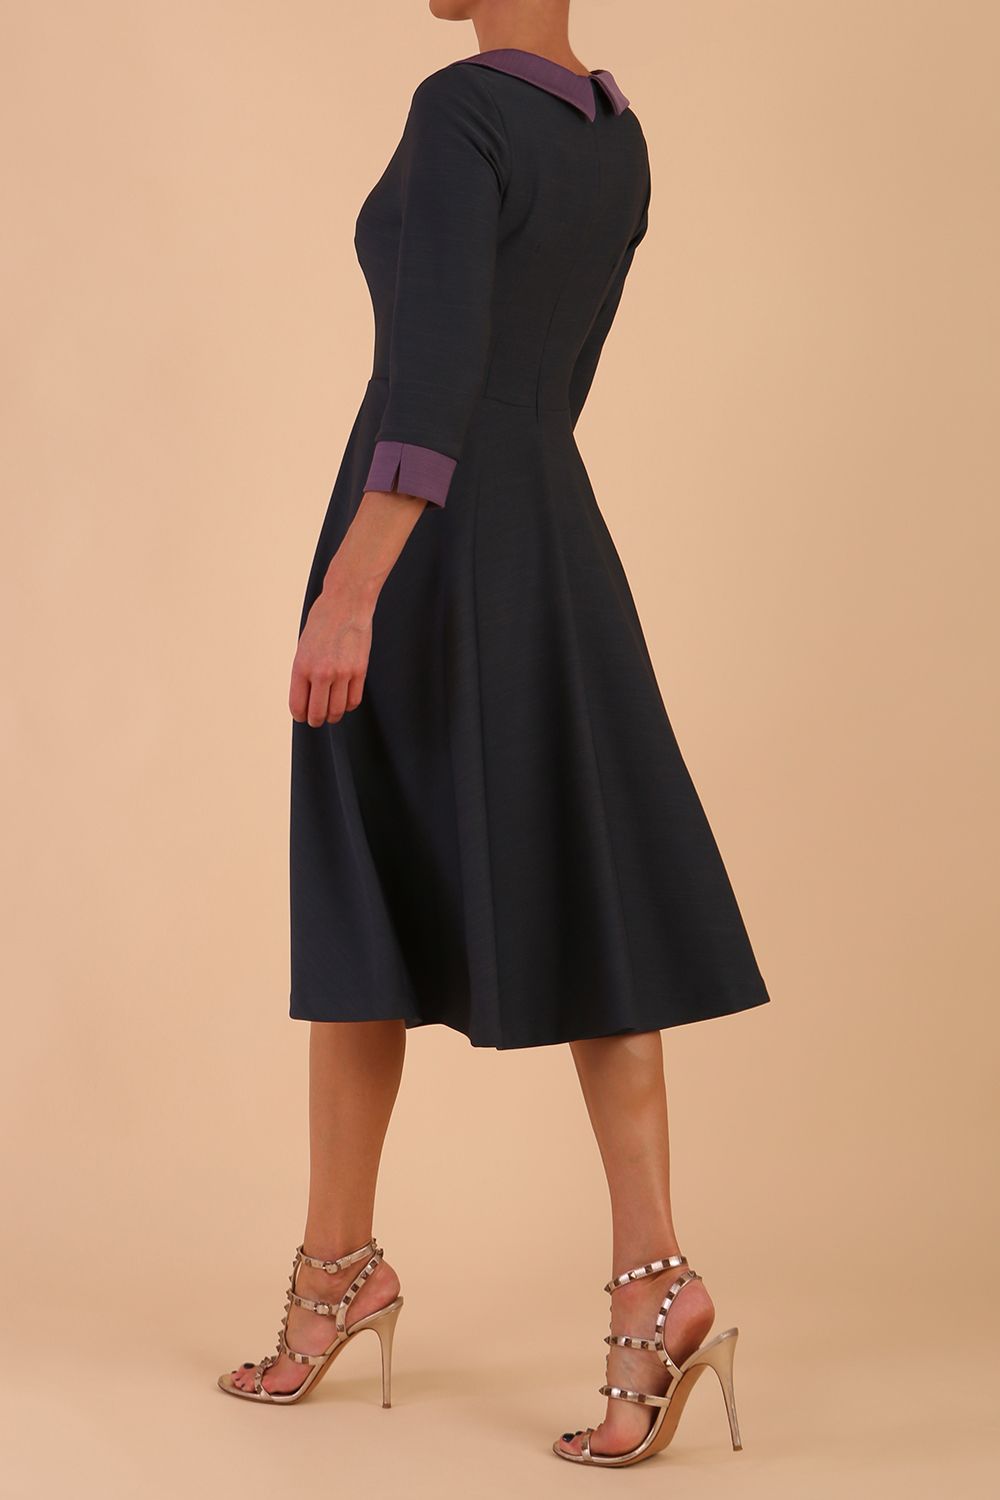 Model wearing Diva catwalk Coralia swing dress in slate grey / dusky lilac contrast with three quarter sleeve figure fitted back image